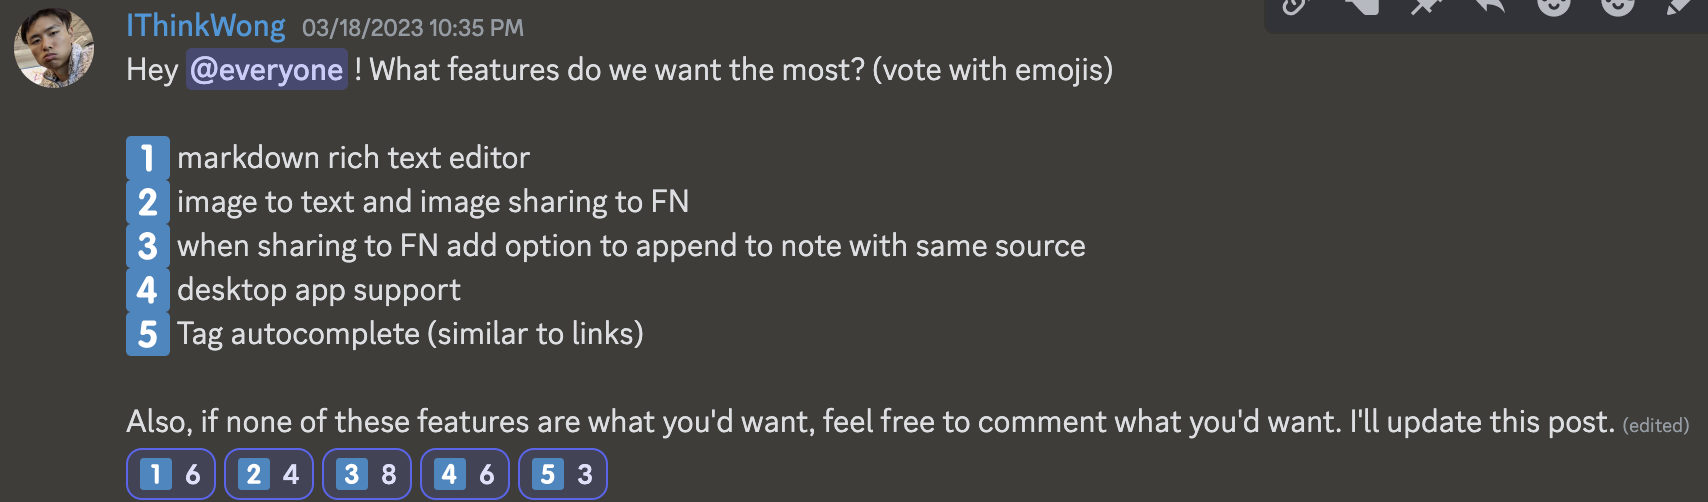 discord-poll-2023-03-18.png